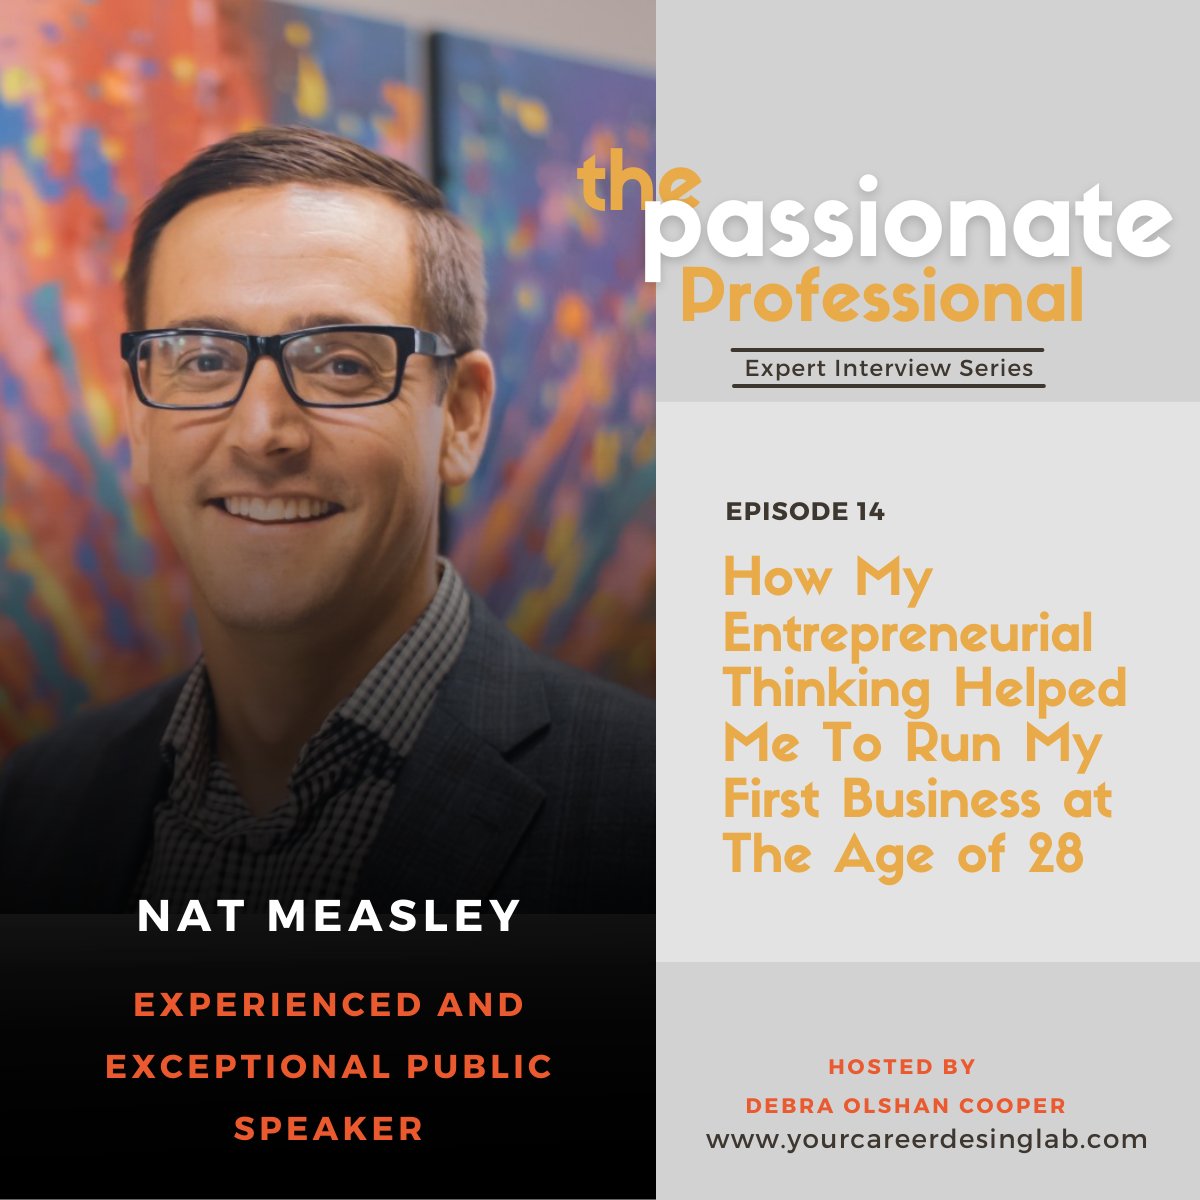 New episode of #ThePassionateProfessional is up! ➡️ yourcareerdesignlab.com/the-passionate…

#interview #professional #career #coaching #learning #passion #careeradvice #skills #management #topvoices #aventurafl #miami #newyork